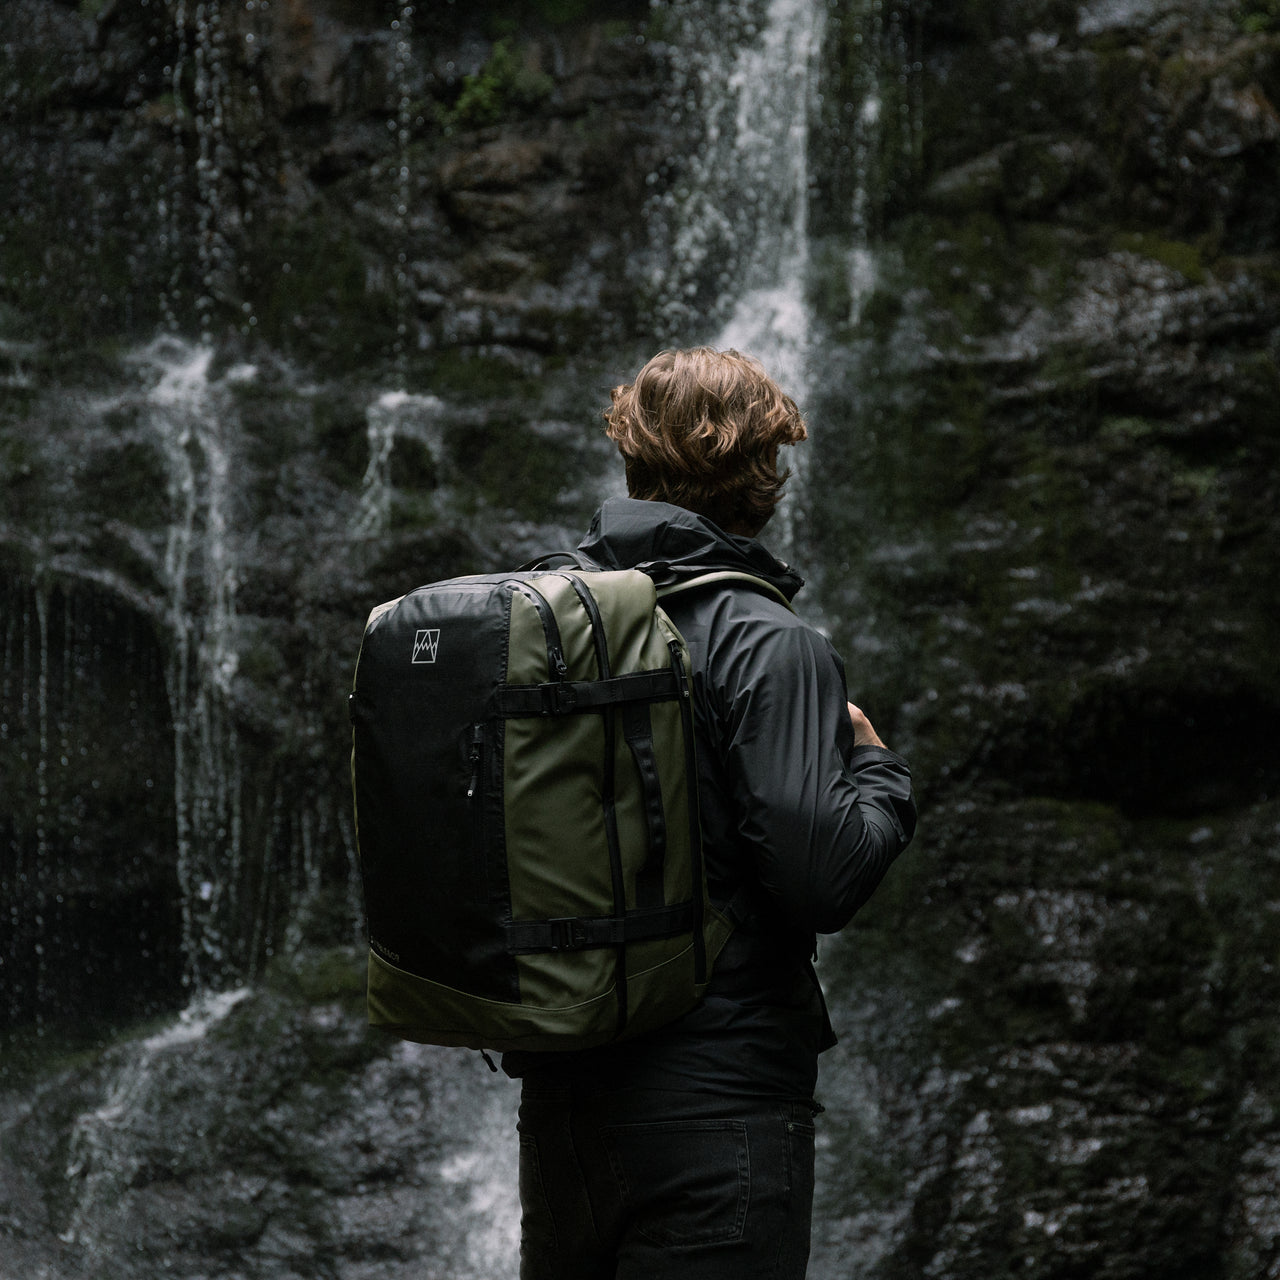 A man wearing the Adventure Bag in Urban Green while looking at a waterfall. Shot from the back.